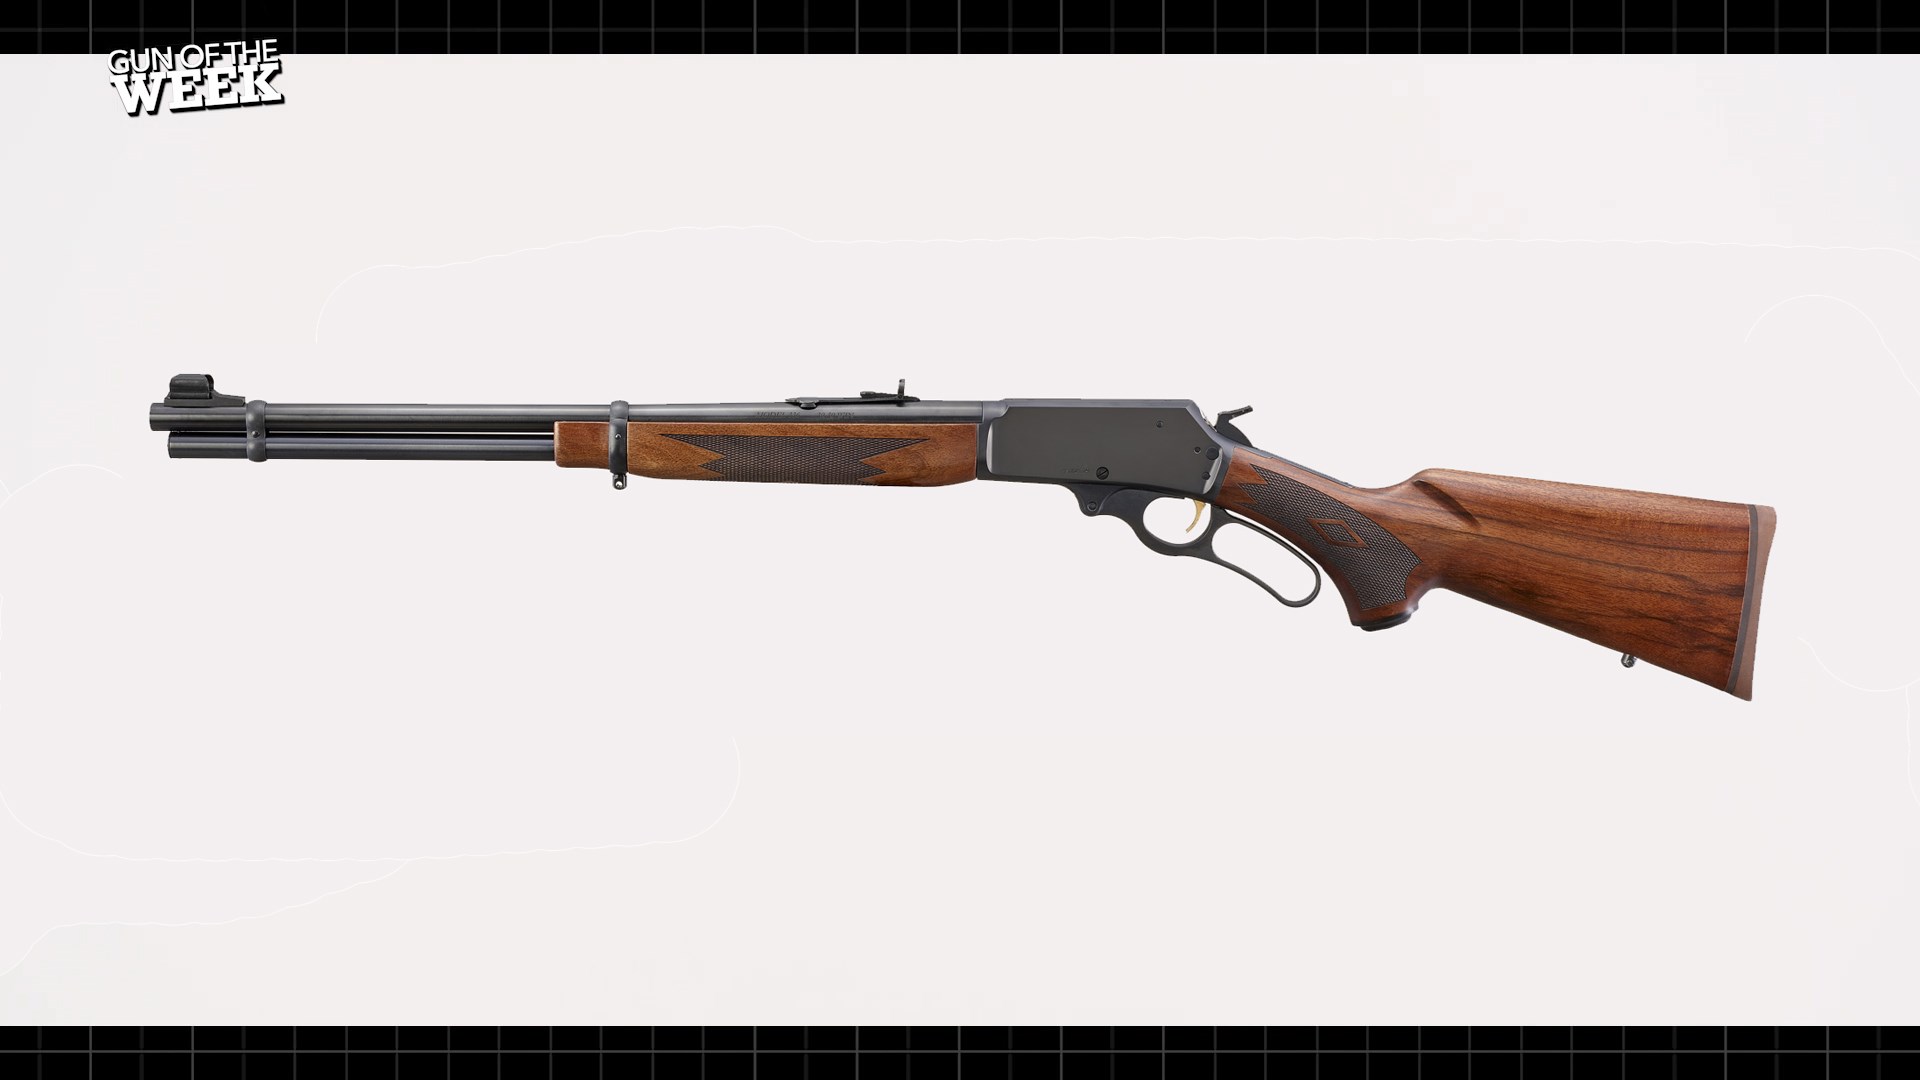 GUN OF THE WEEK text on image of Marlin Firearms Model 336 Classic lever-action rifle wood stock blued steel